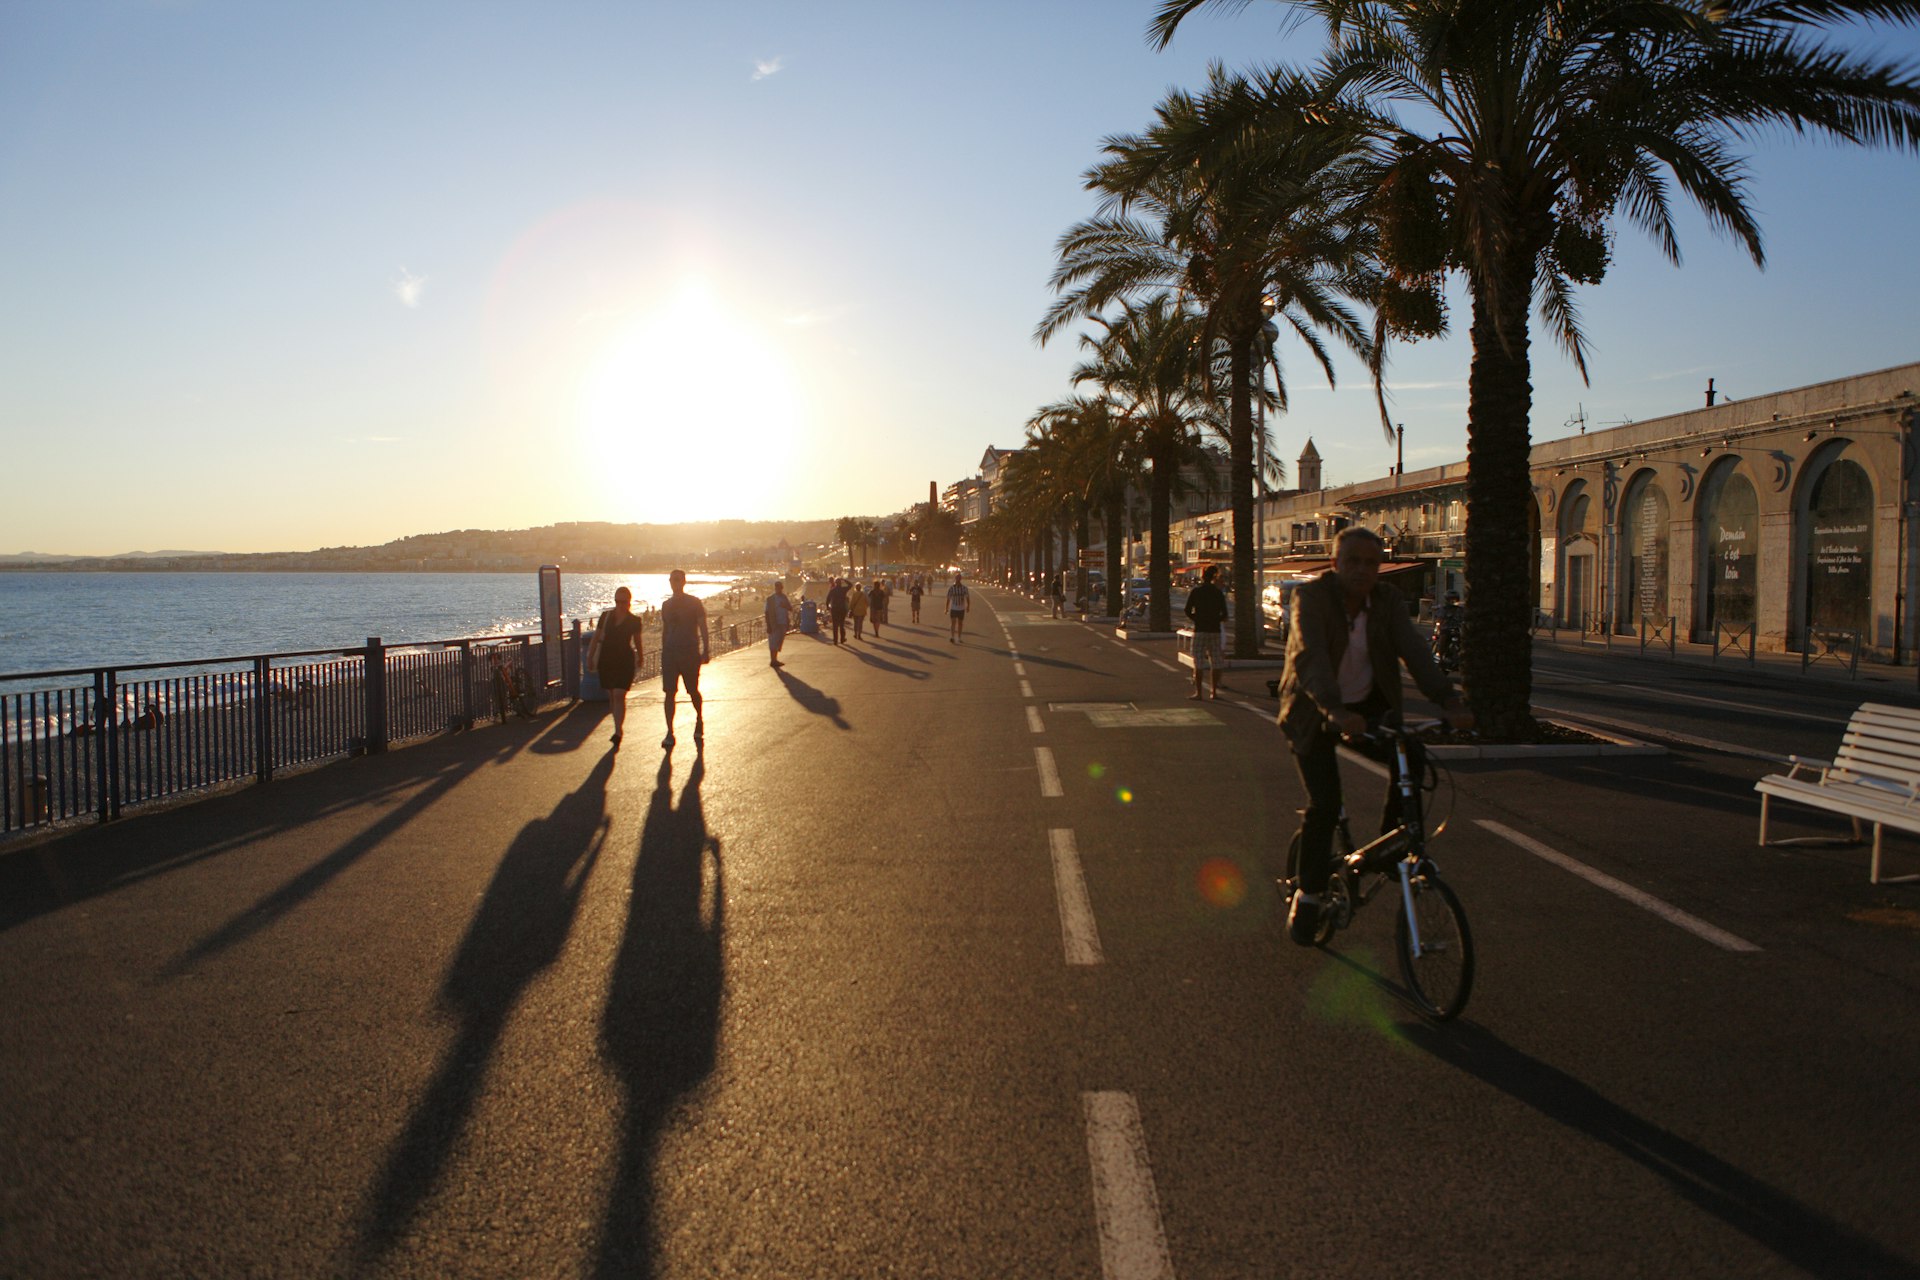 People walking and cycling seen in silhouette as the setting sun casts shadows on the Promenade des Anglais, Nice, Côte d’Azur, France